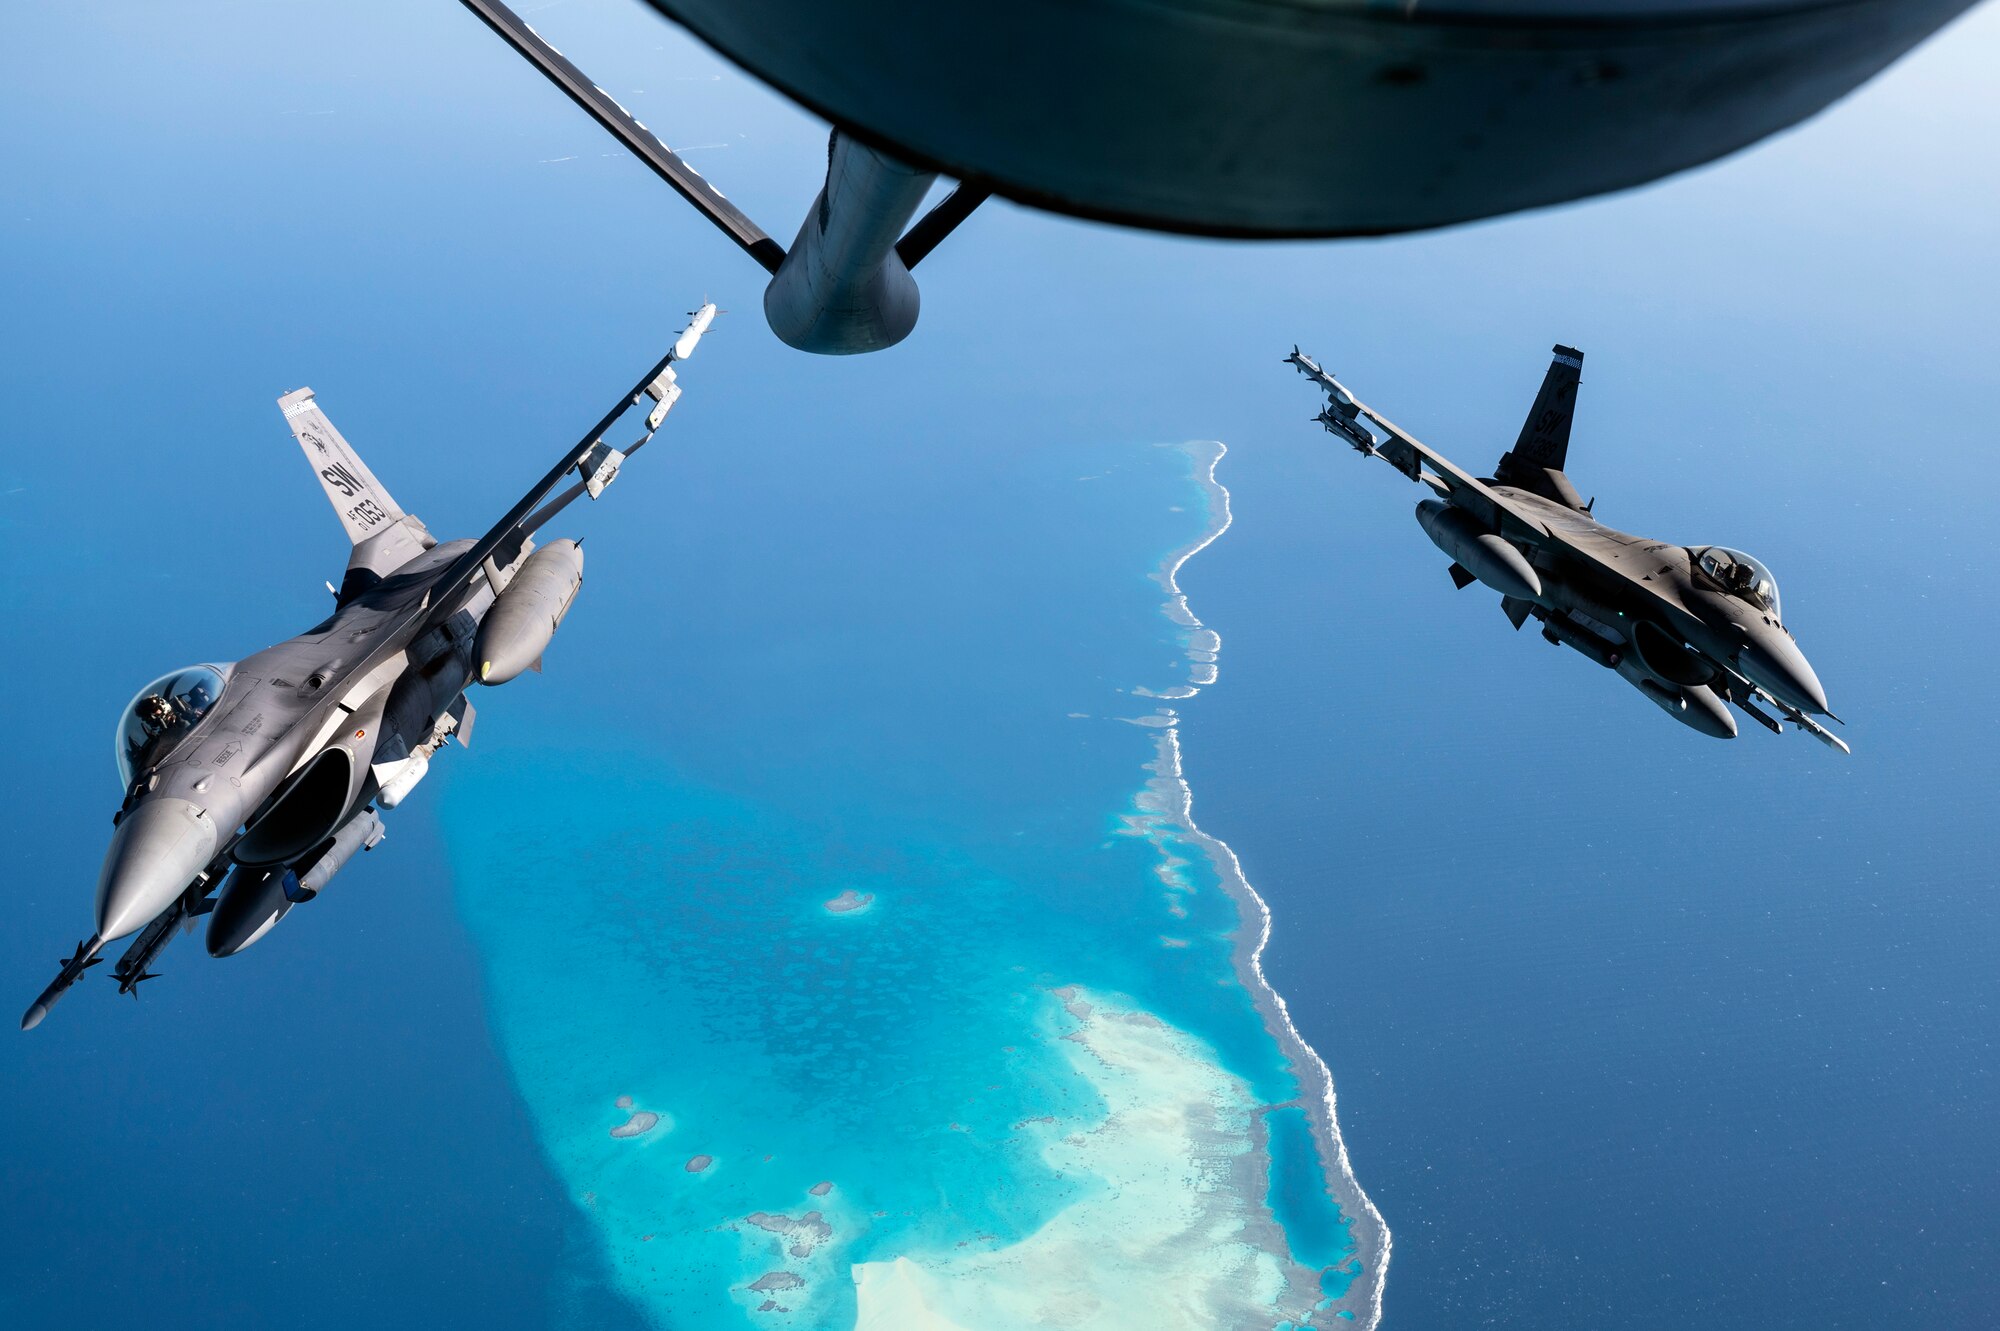 U.S. Air Force F-16 Fighting Falcons assigned to the 332nd Air Expeditionary Wing break away from behind a U.S. Air Force KC-135 Stratotanker